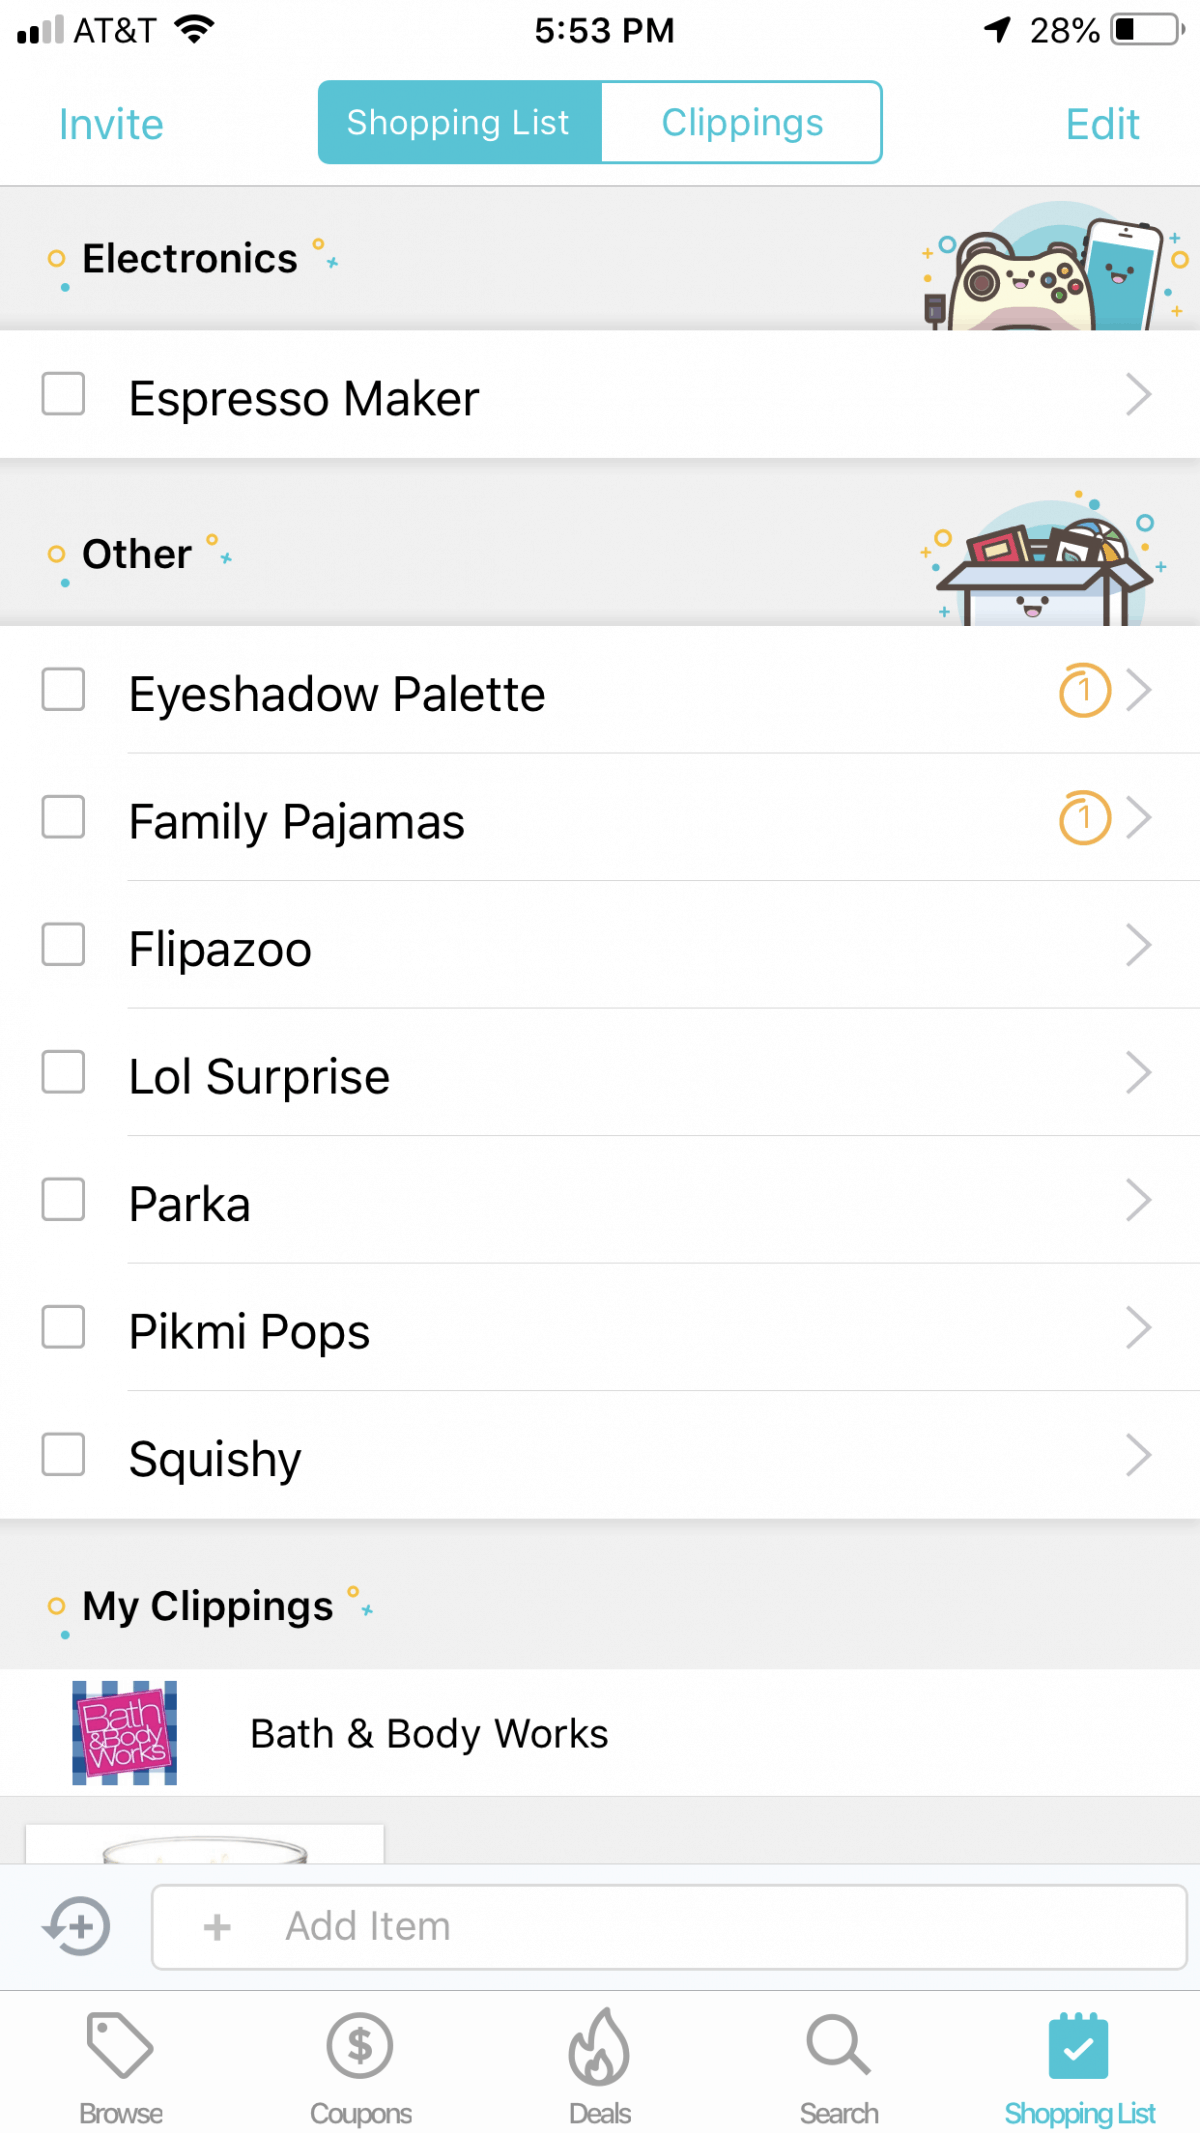 The shopping list feature in the Flipp app